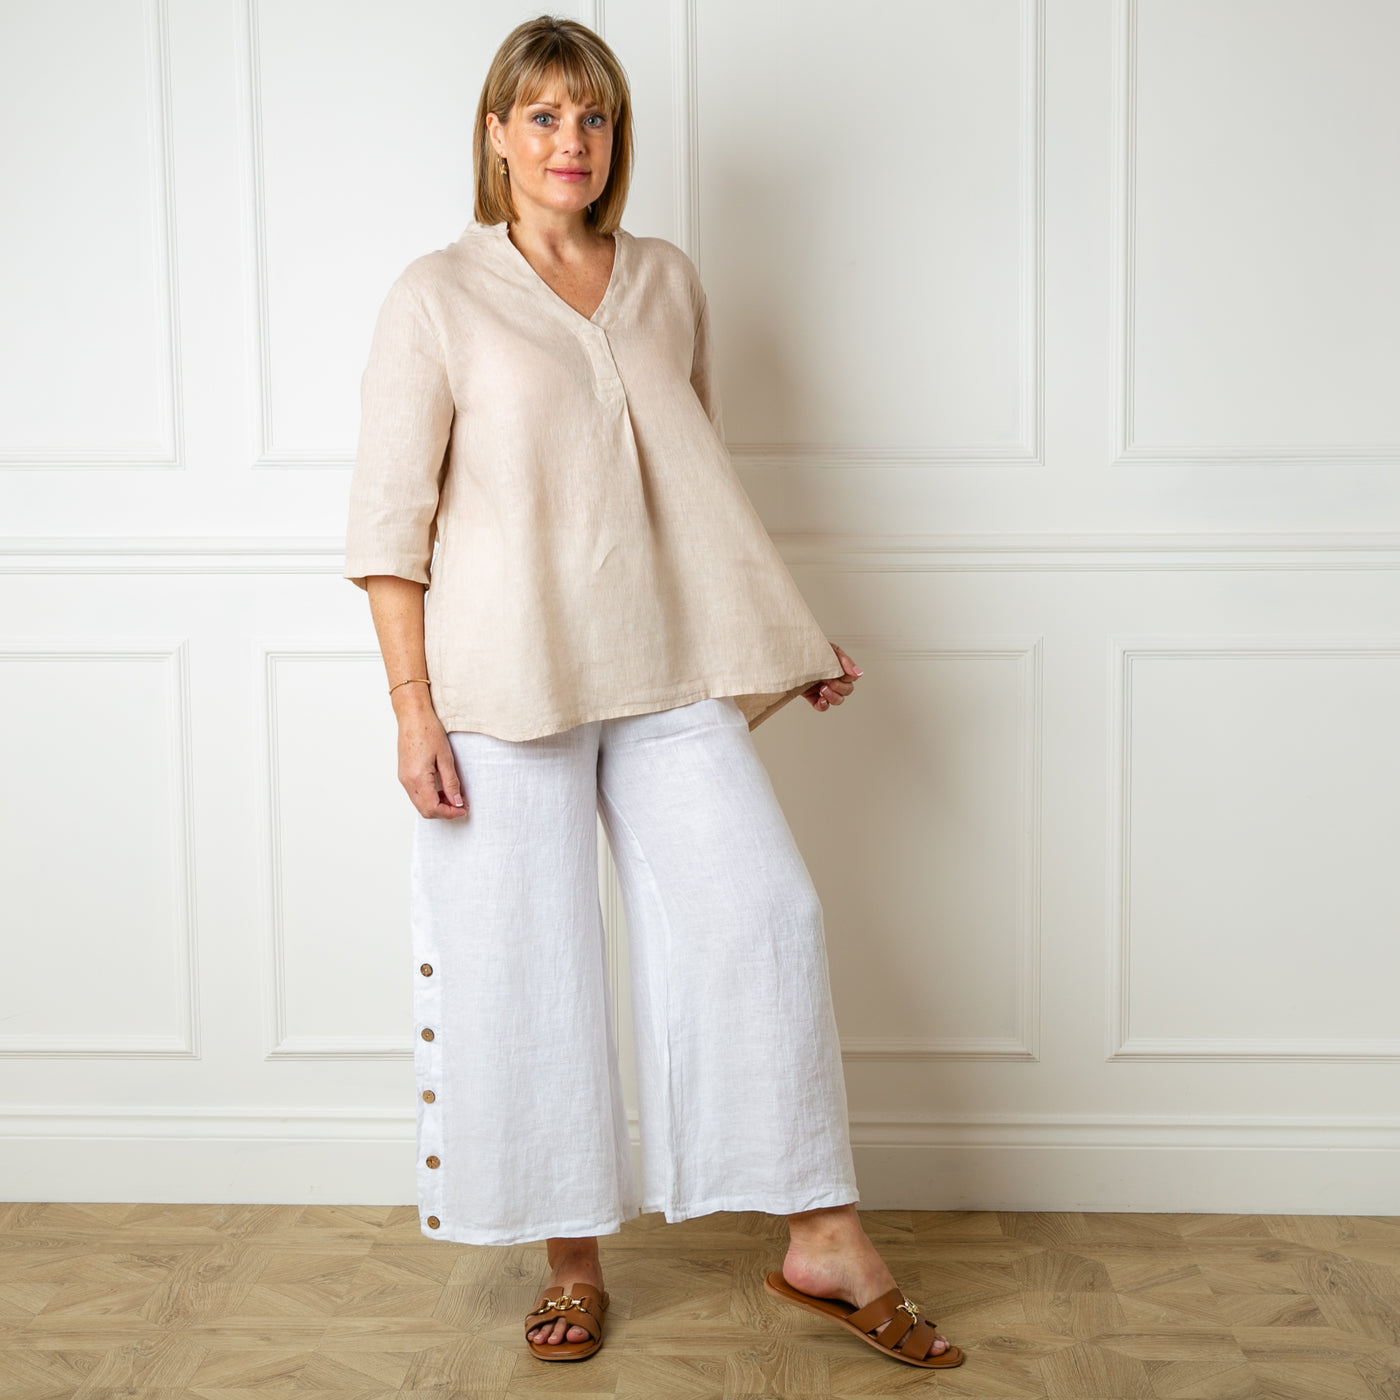 The Linen Tunic Top in natural stone cream which is perfect for a relaxed summer look 